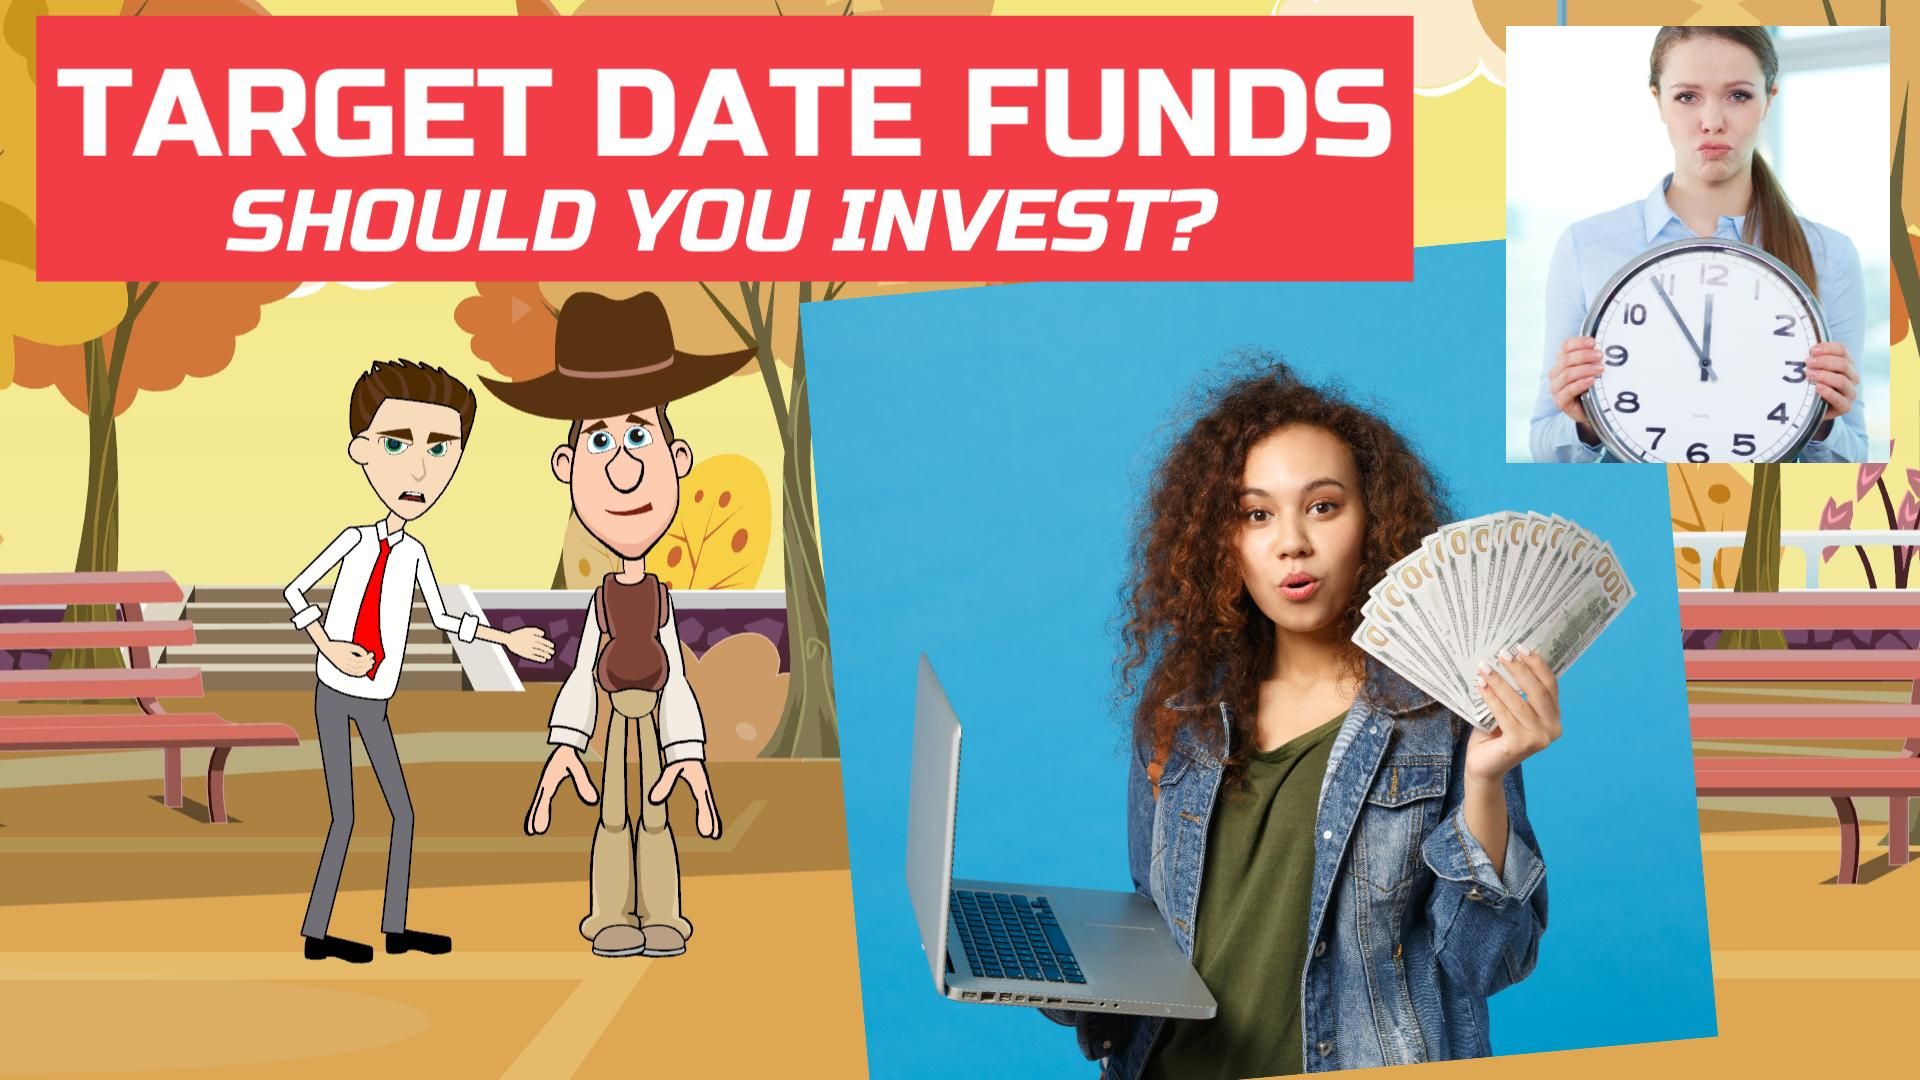 Target Date Funds - Should You invest